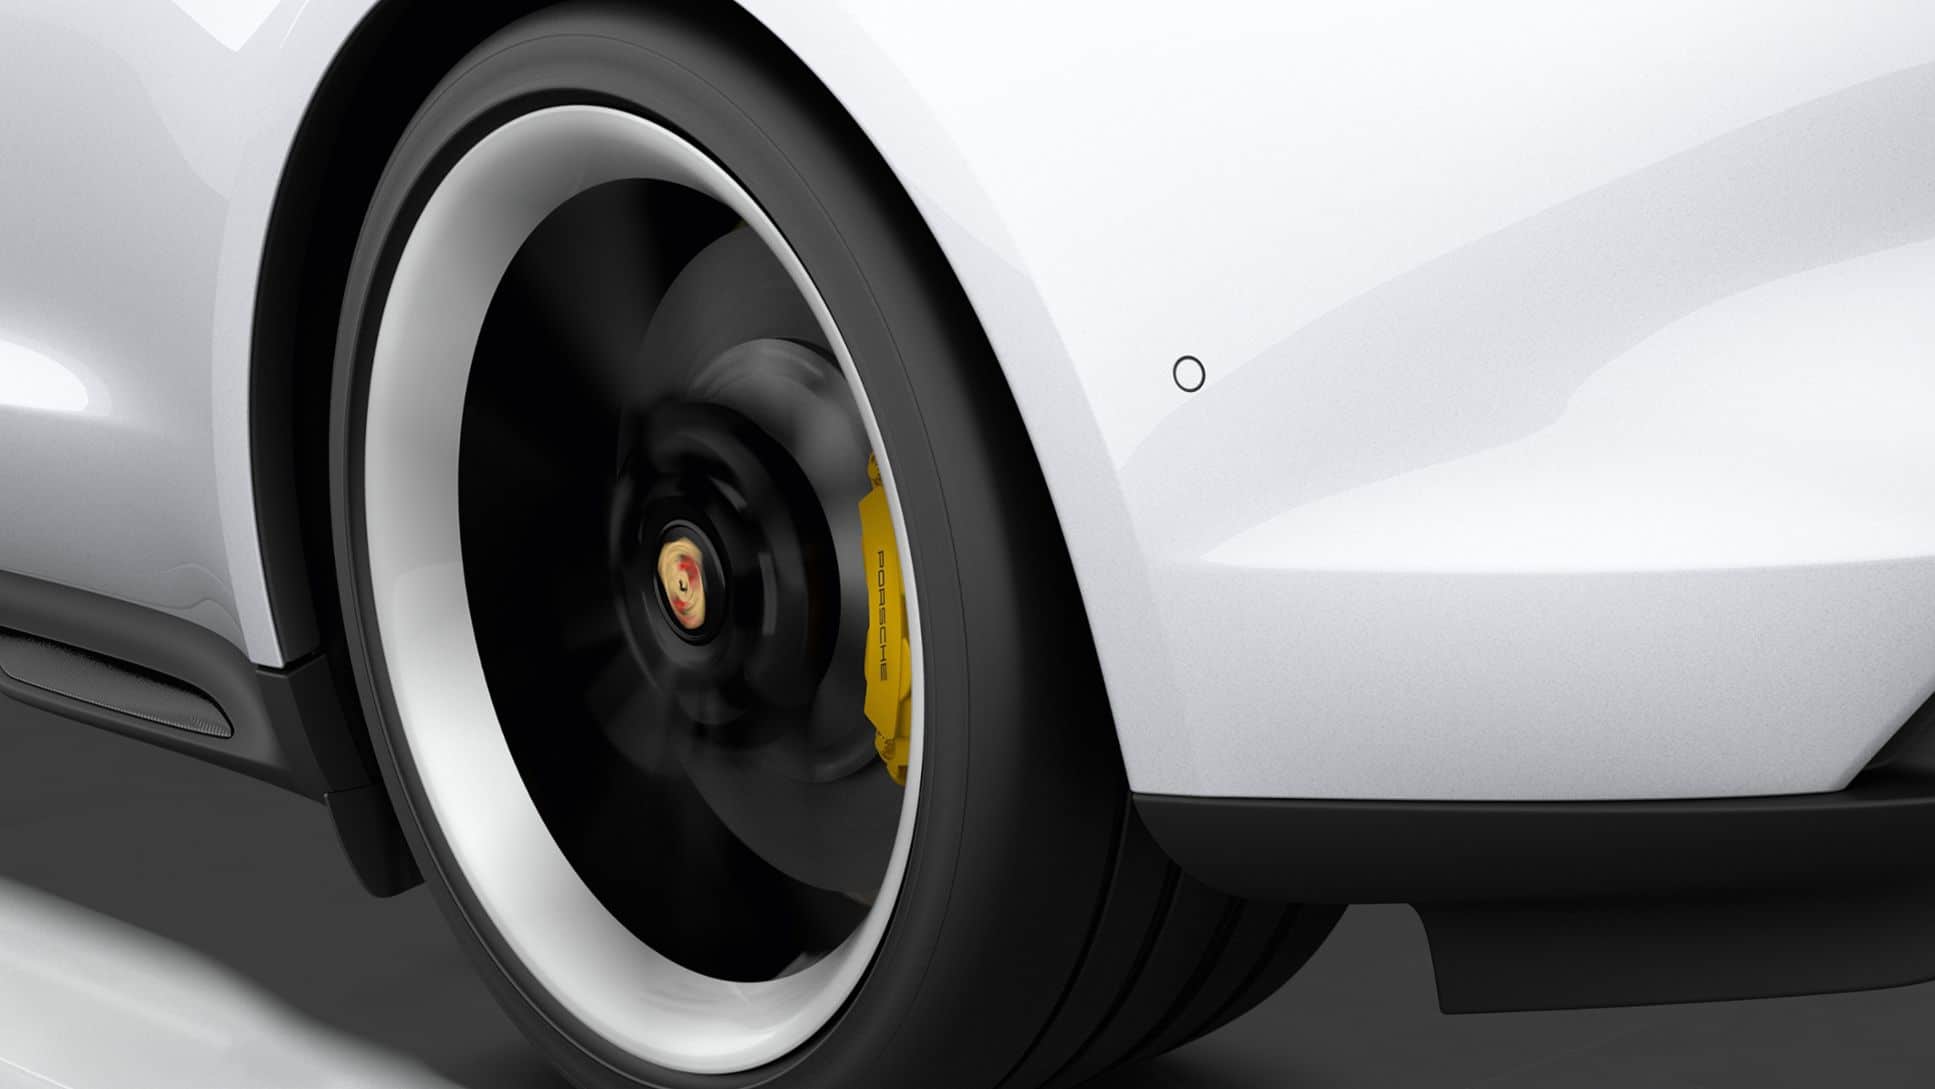 Regenerative braking is significant in the Porsche Taycan